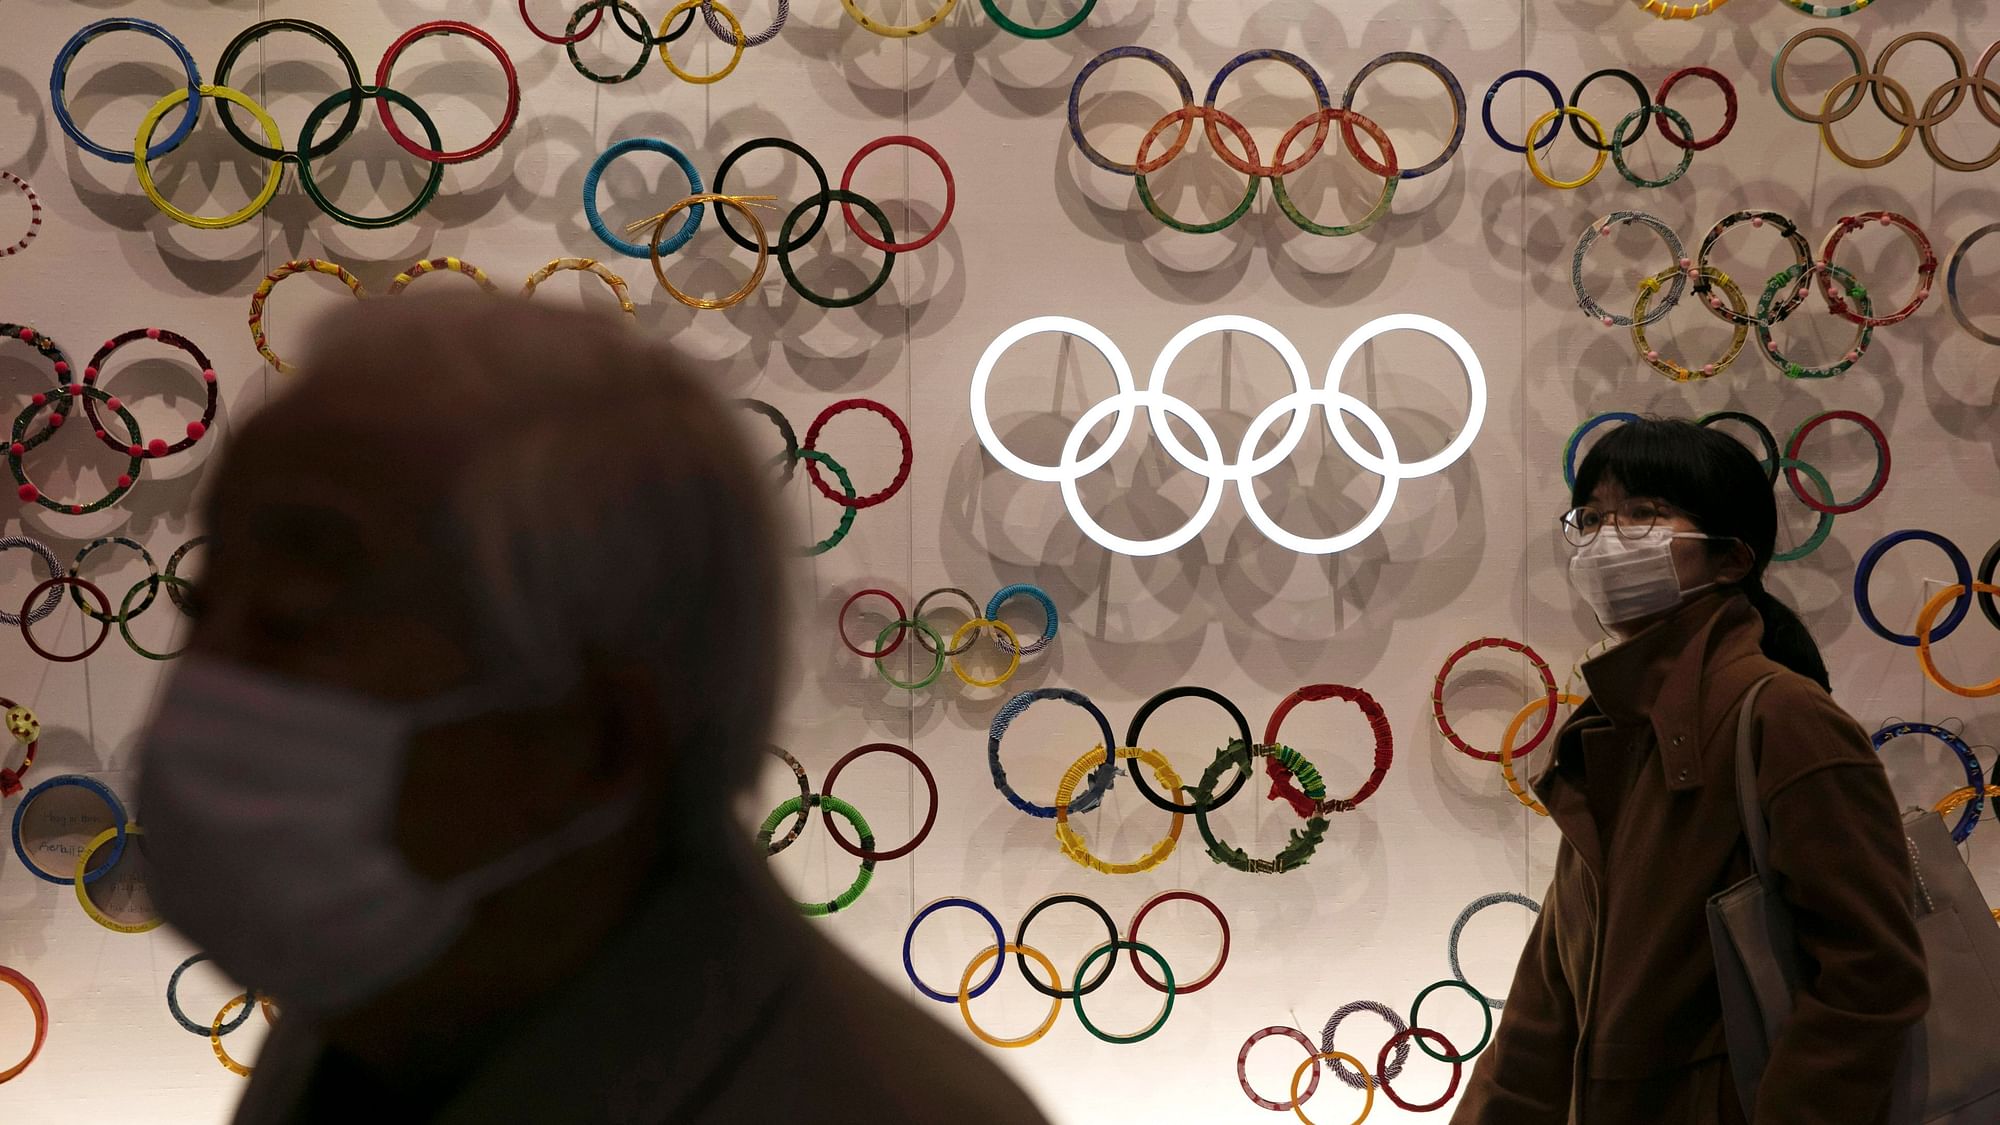 An IOC official has disagreed with the suggestions that a vaccine for COVID-19 is needed to hold the Olympics.